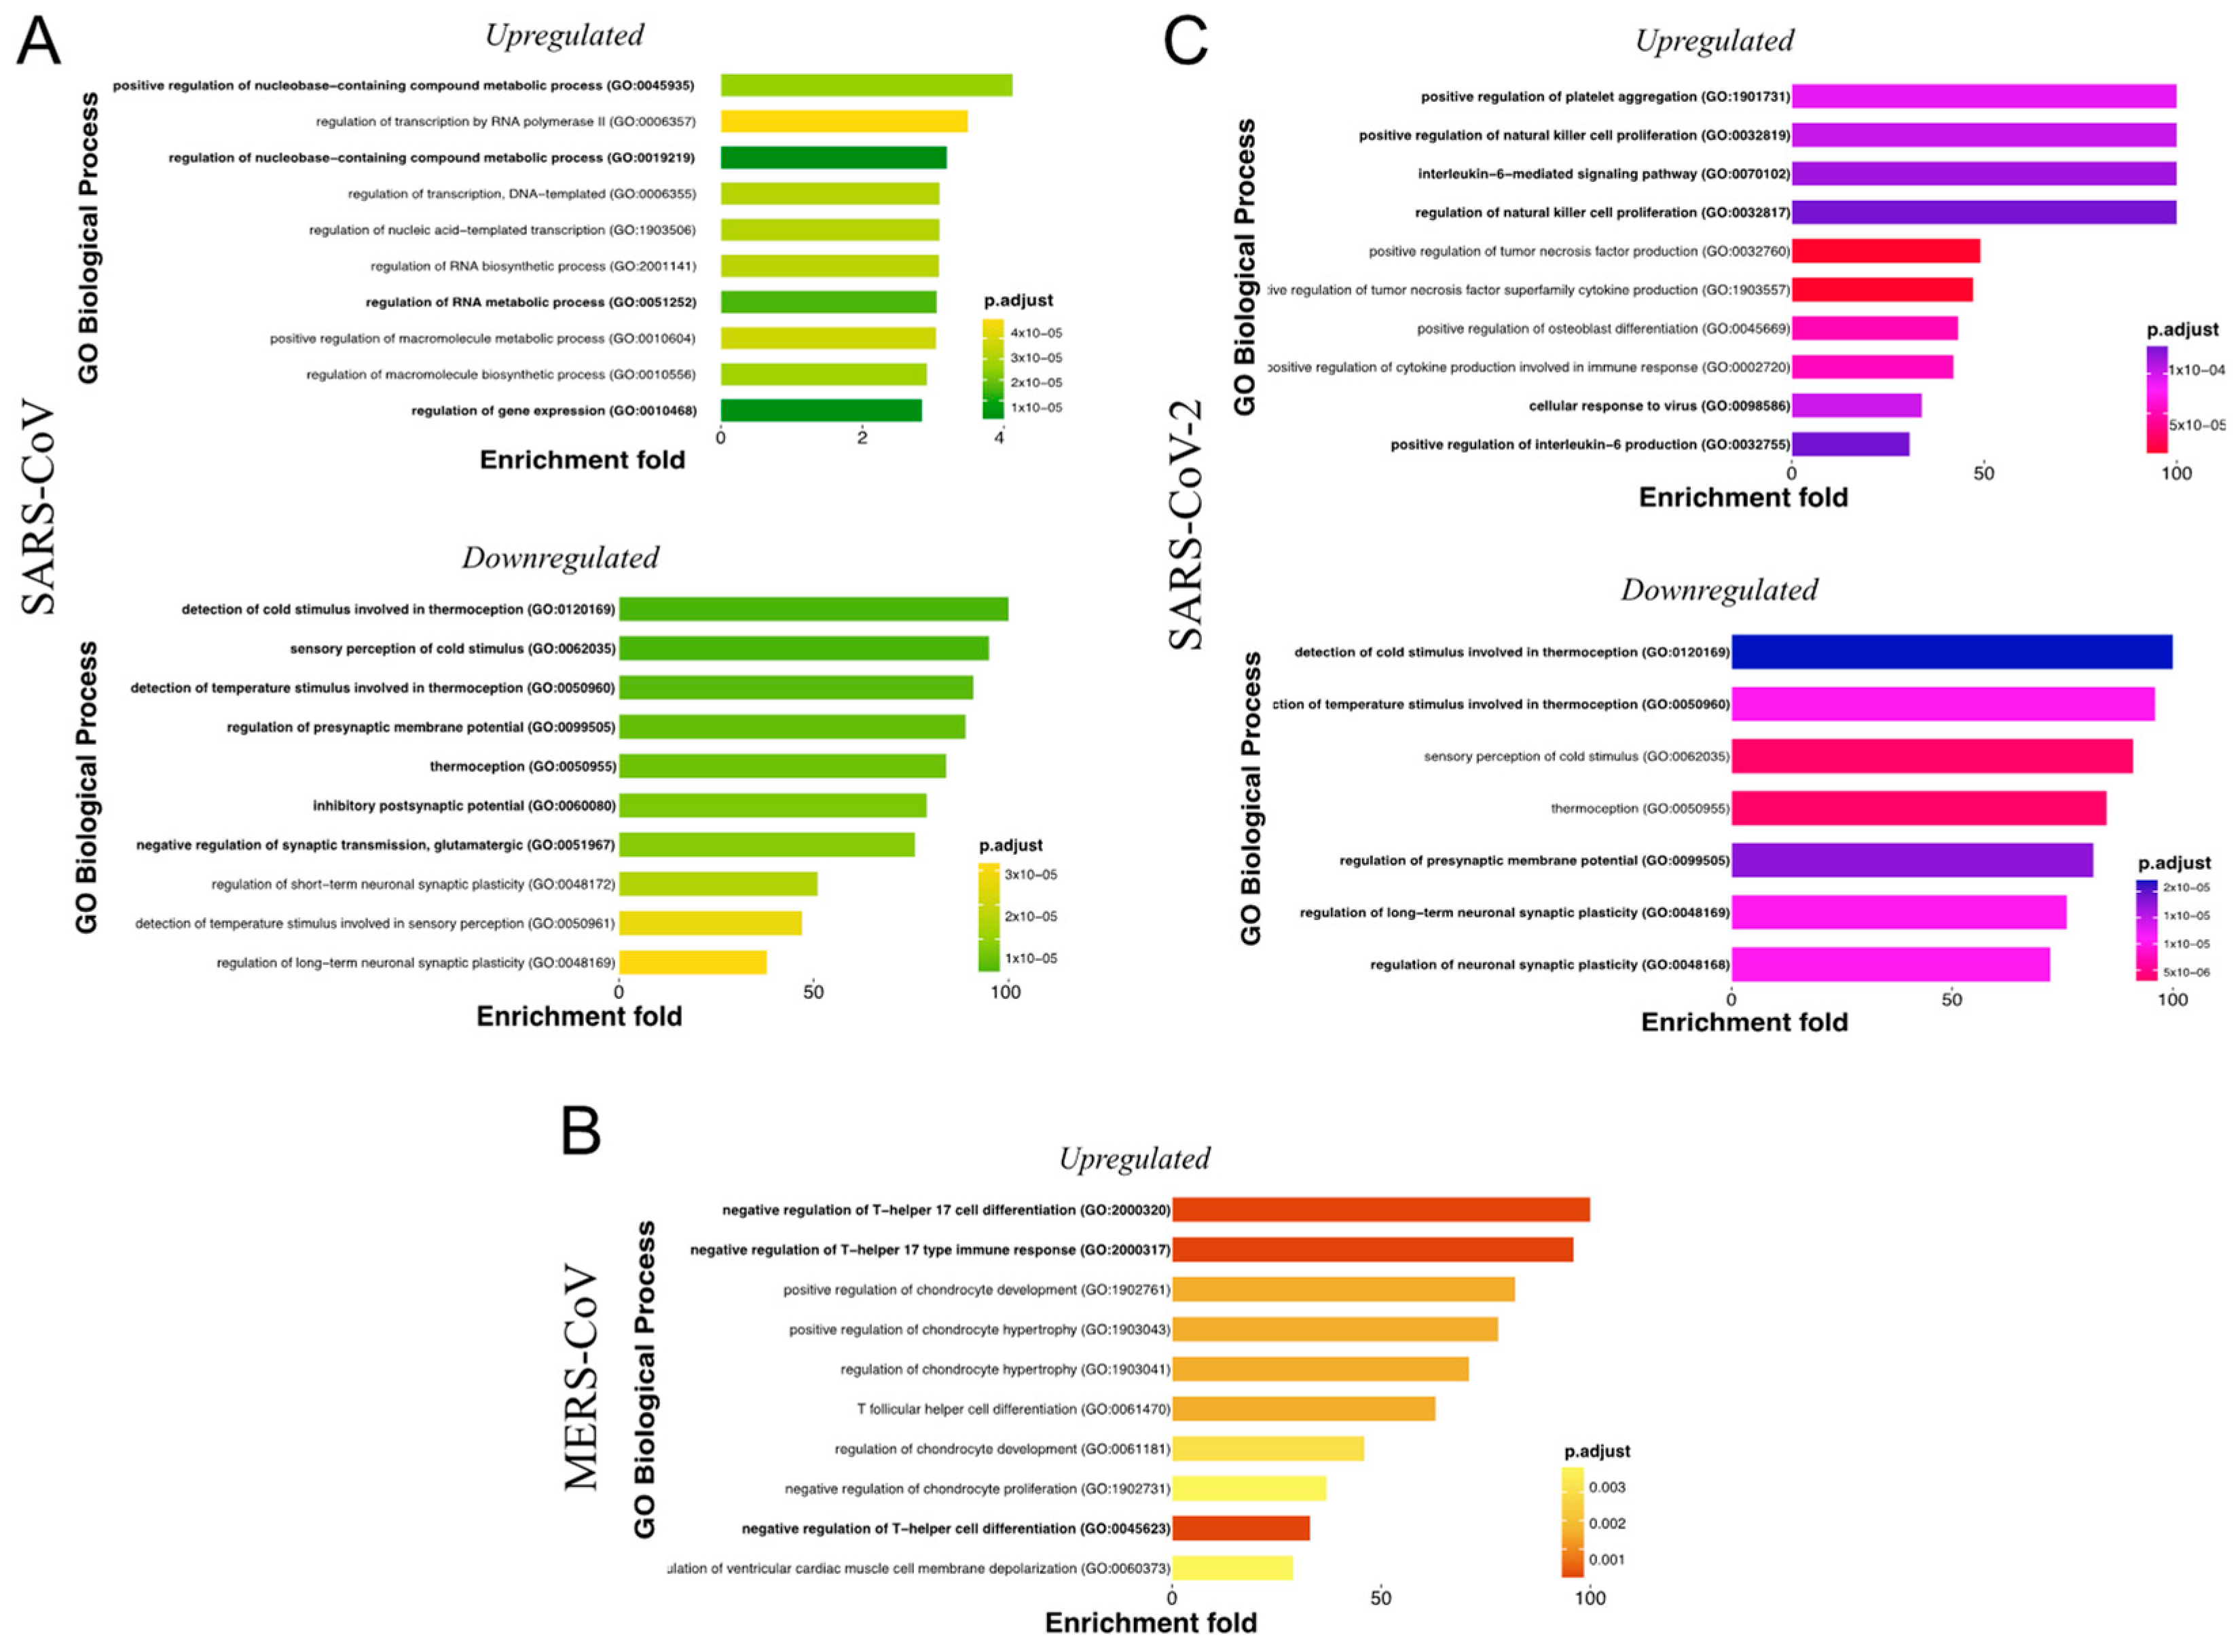 Evolutionary analysis of endogenous intronic retroviruses in primates  reveals an enrichment in transcription binding sites associated with key  regulatory processes [PeerJ]